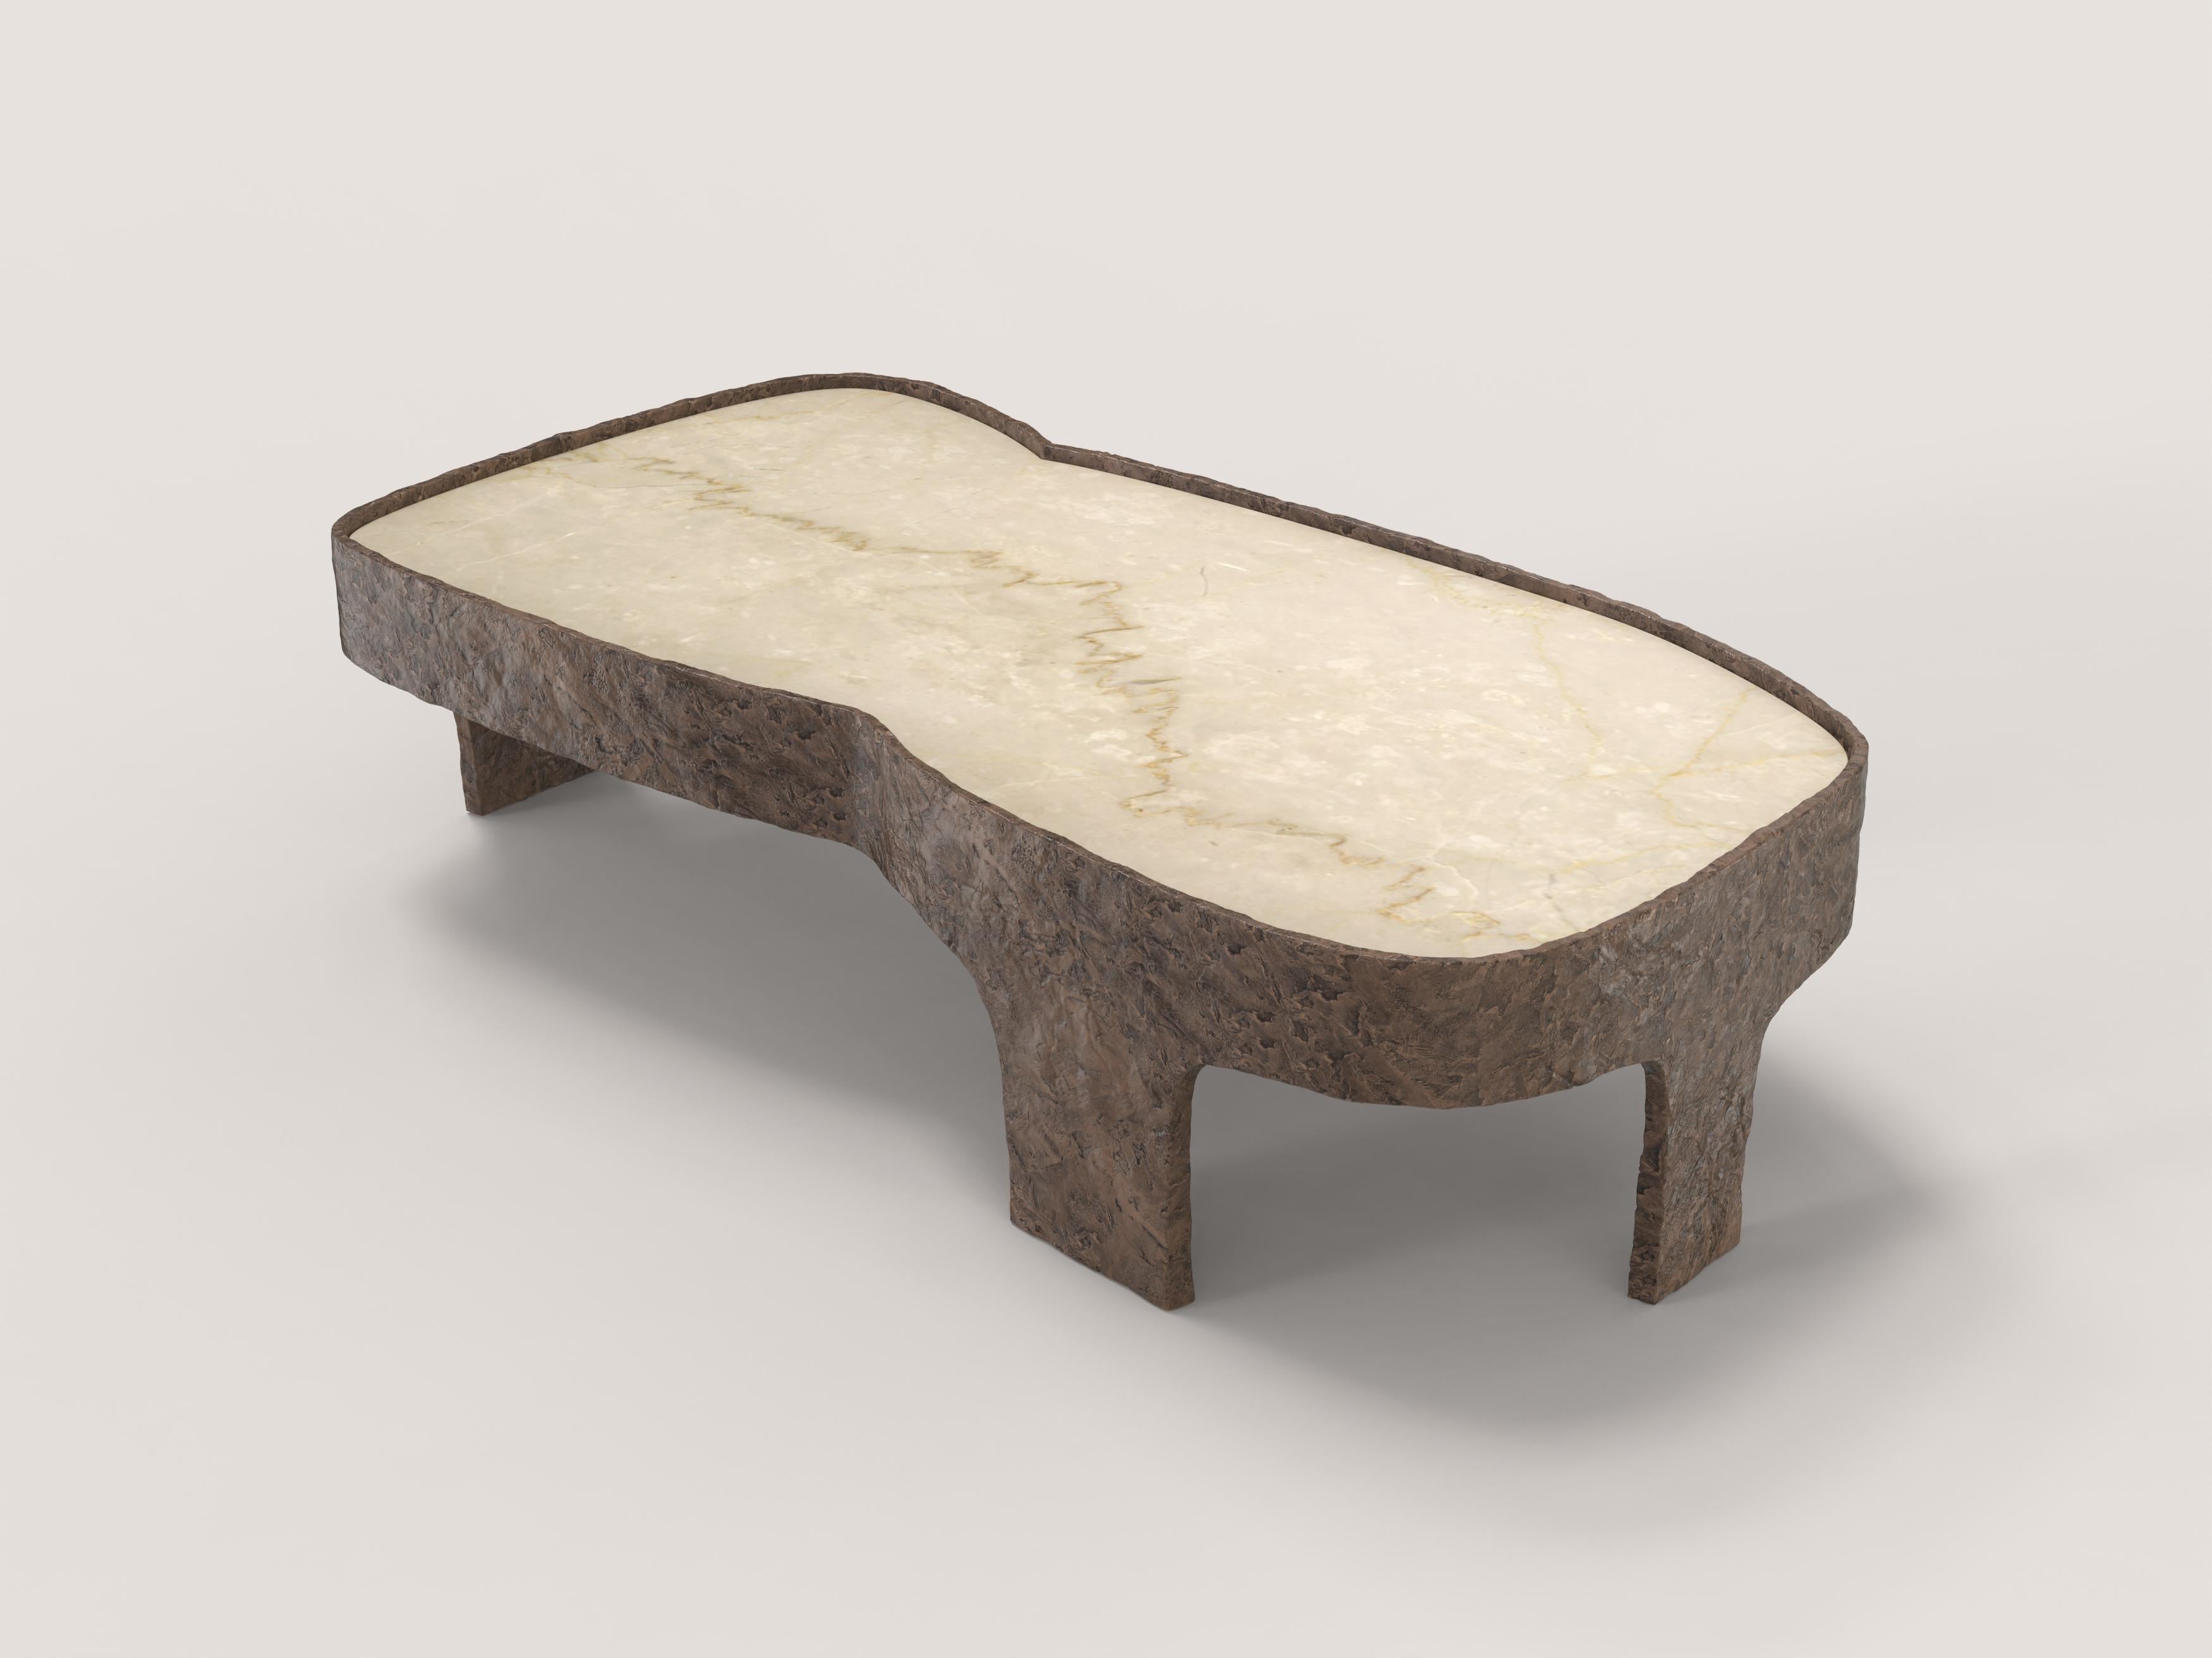 Sumatra V3 is a 21st century side table made by Italian artisans in cast bronze with light brown patina with an extraordinary Botticino Classico marble plane. It is part of the collectible design language Sumatra that has been developed by the